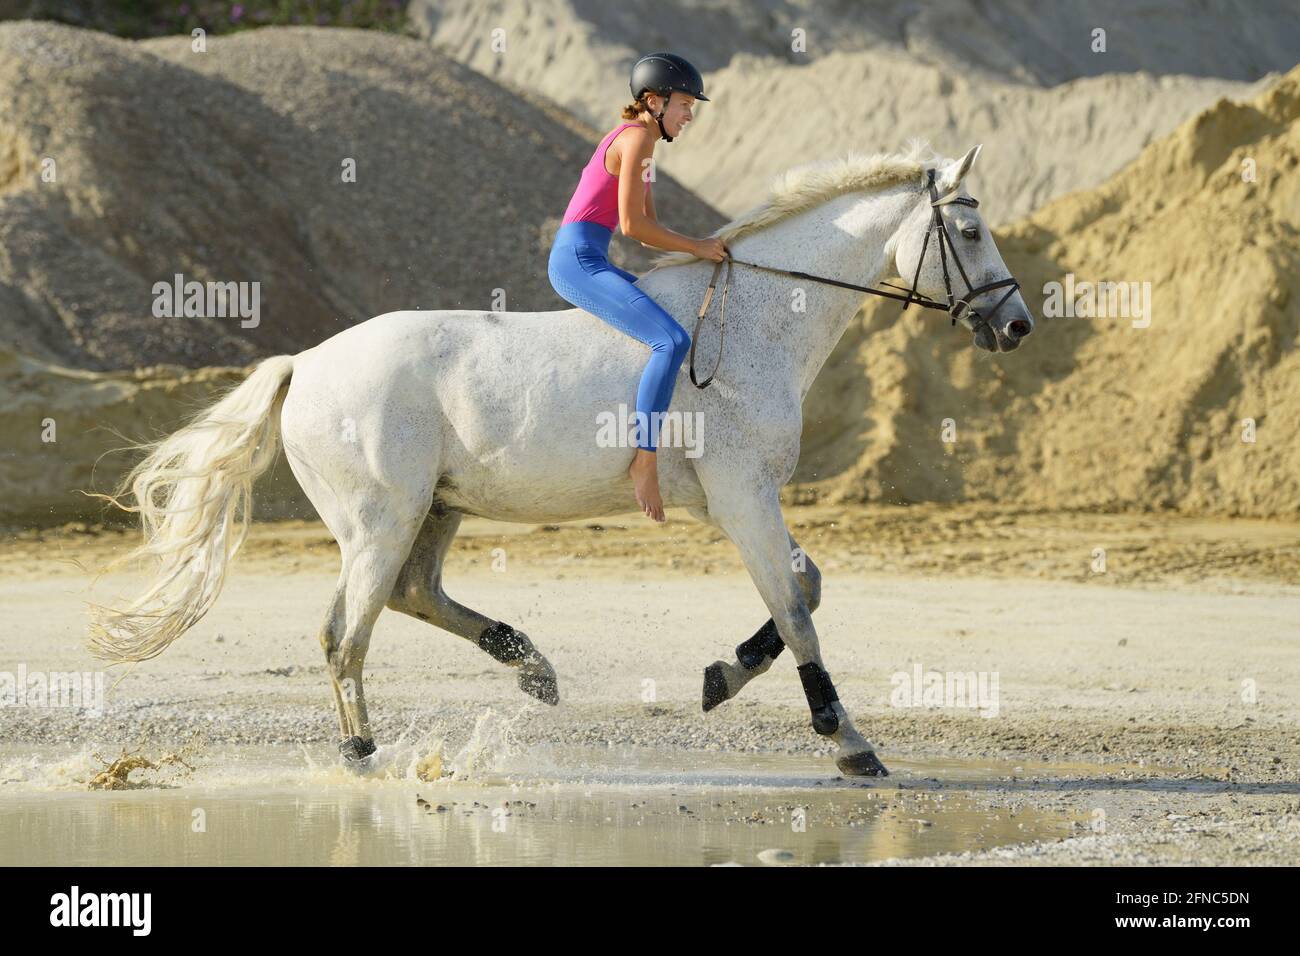 Riding bareback on a Bavarian horse in a gravel pit Stock Photo